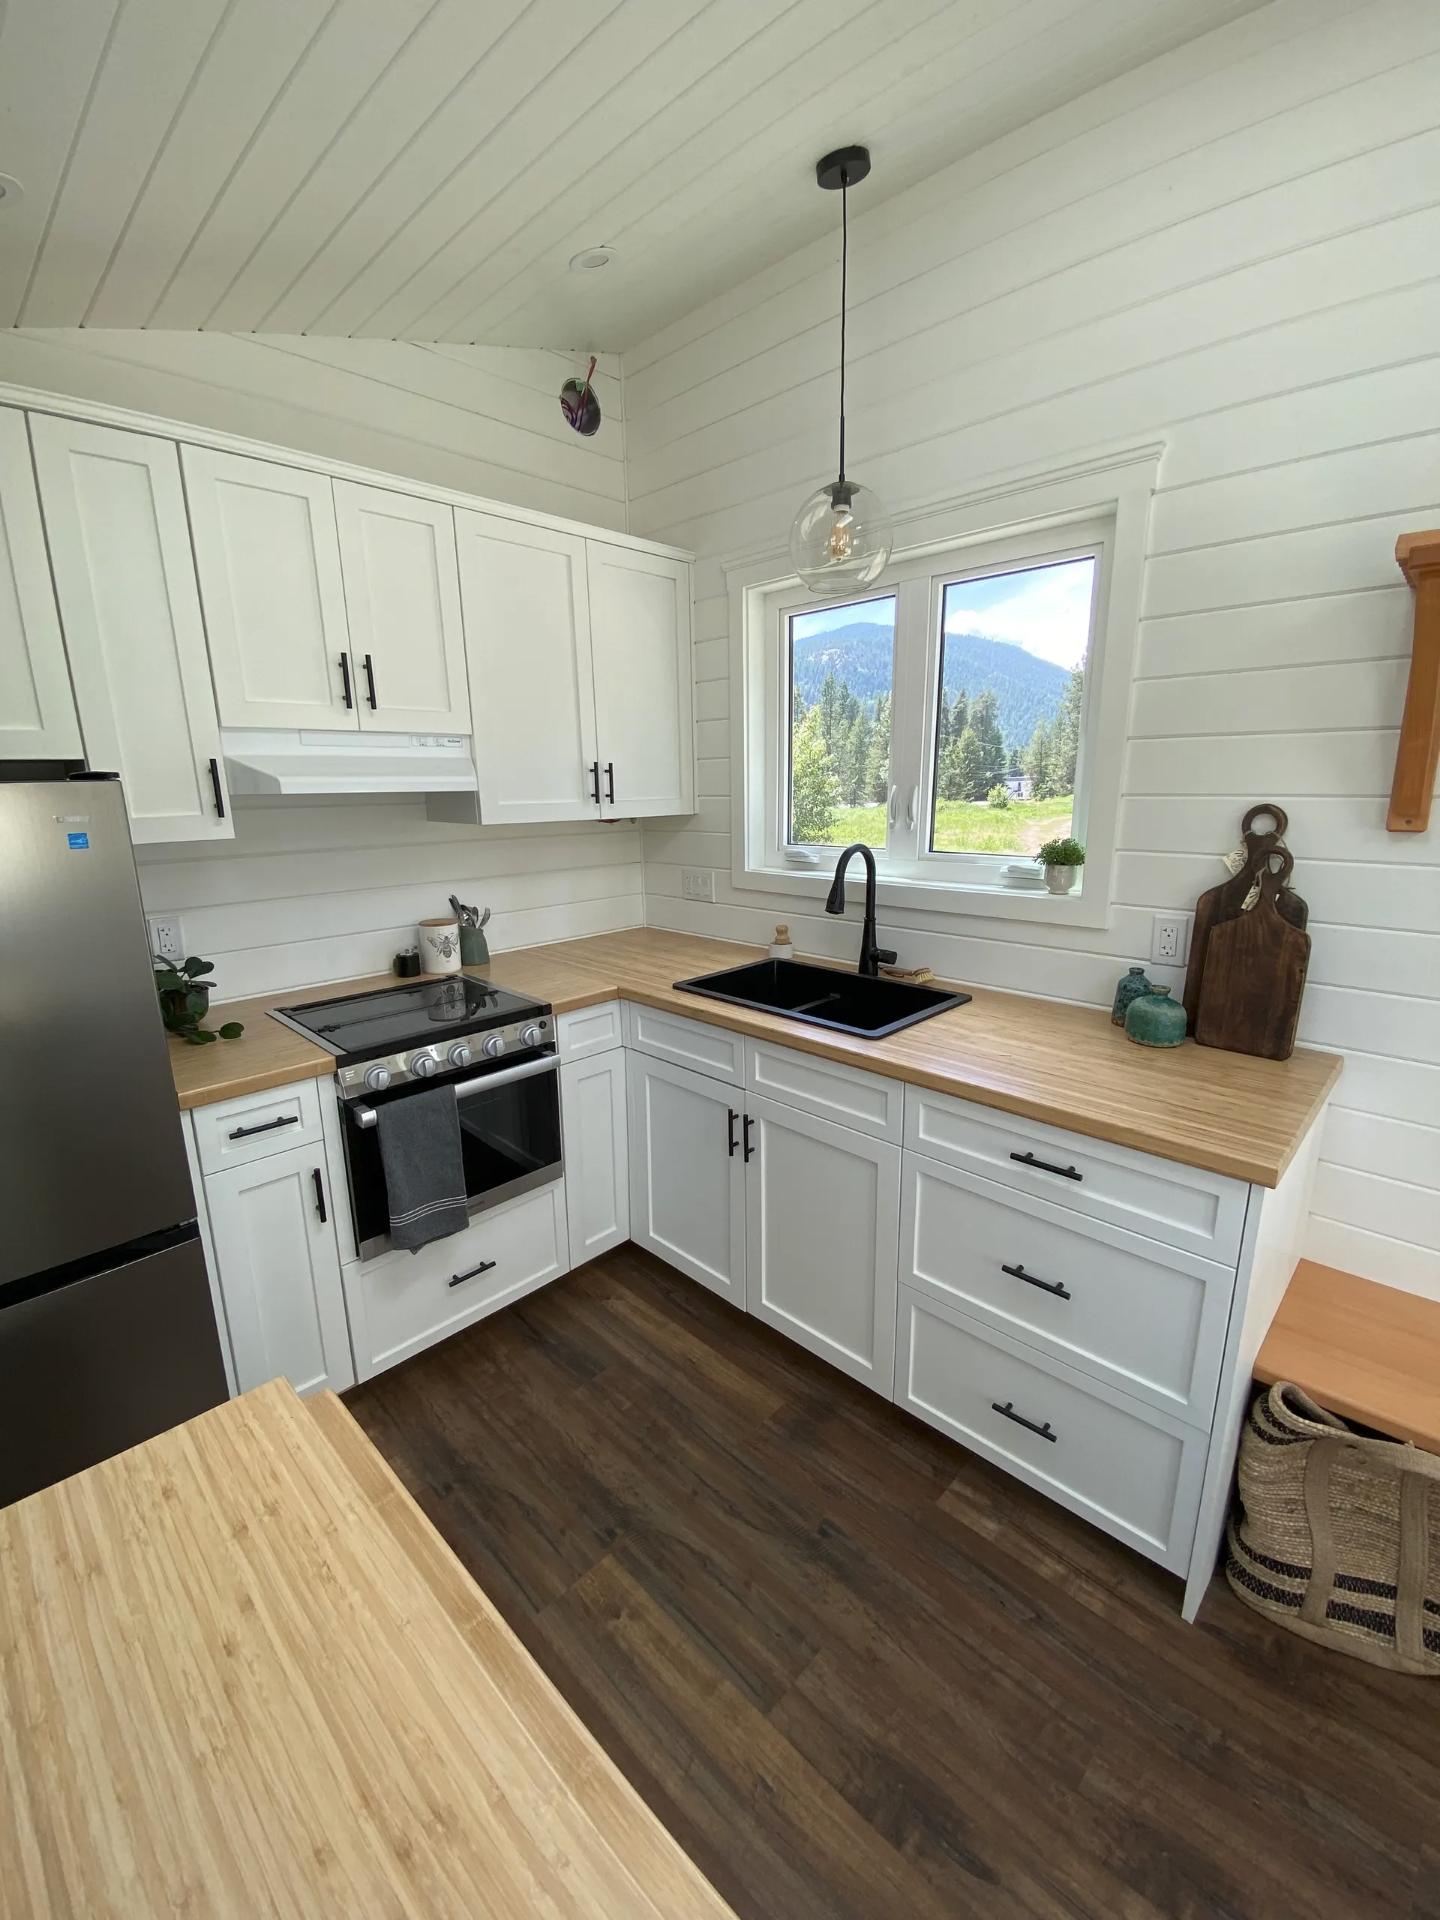 White Cabinets, Including Uppers - Atlas by Canadian Tiny Homes